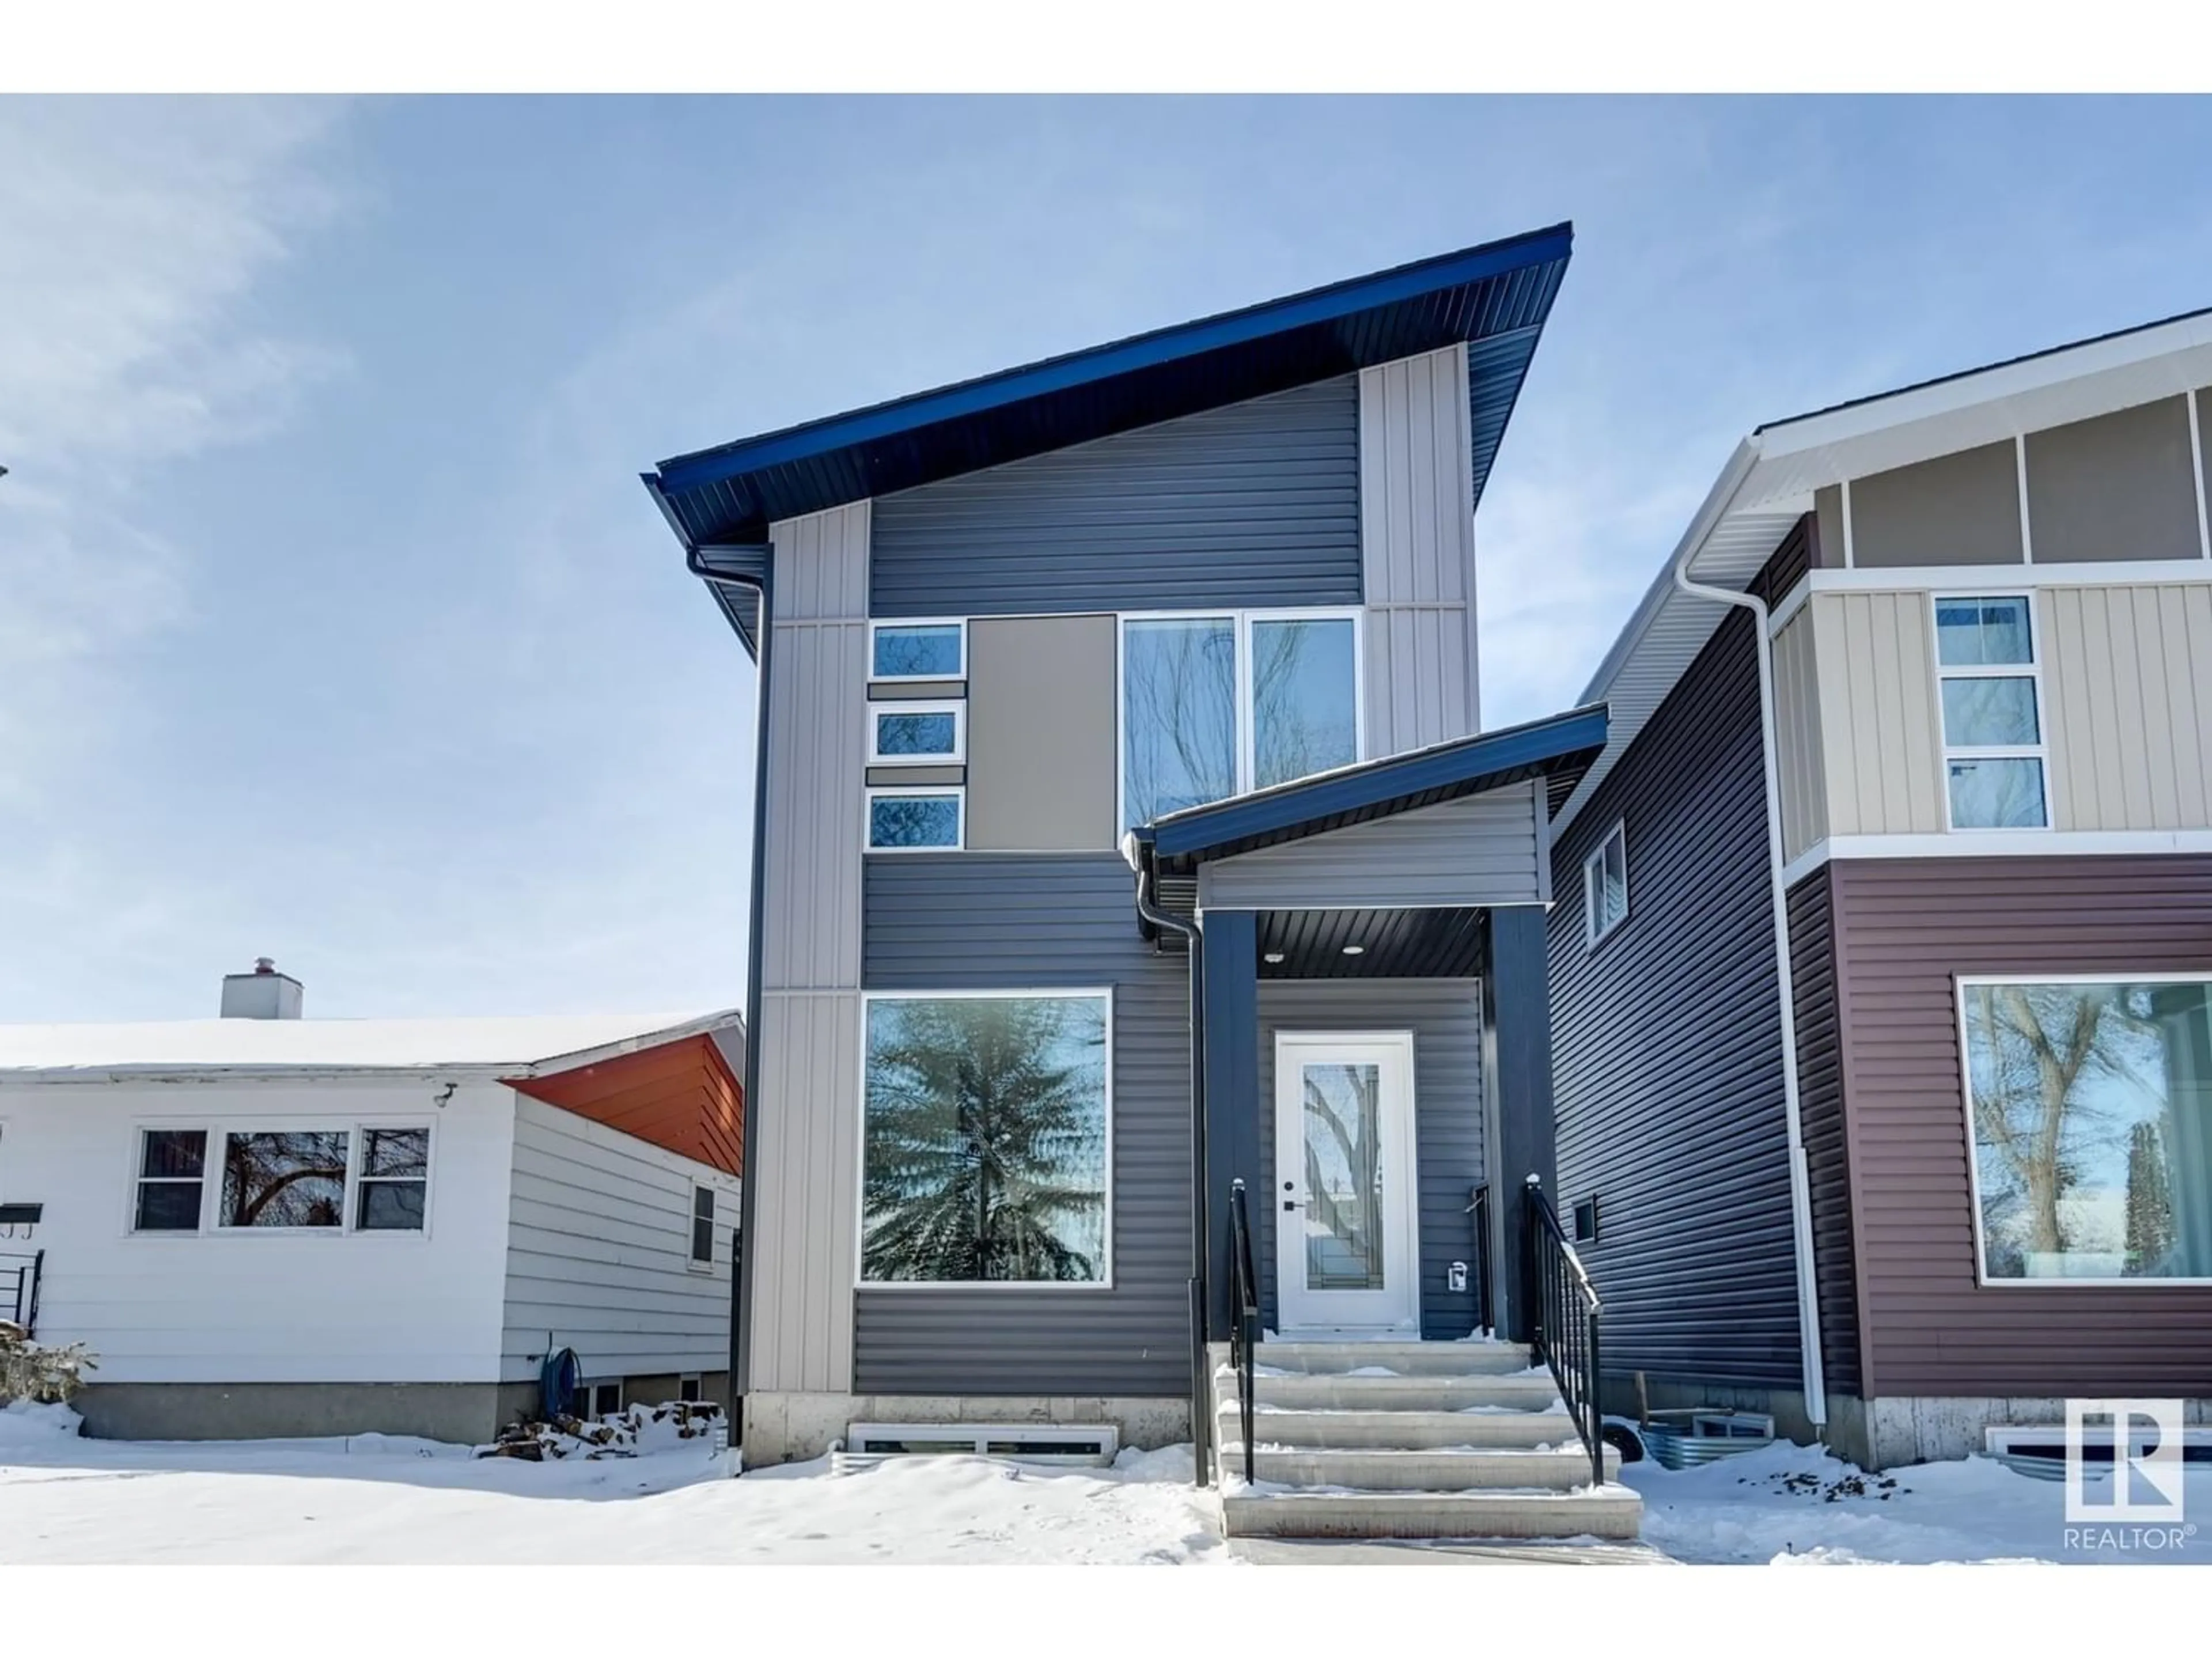 Frontside or backside of a home for 11422 122 ST NW, Edmonton Alberta T5M0B9